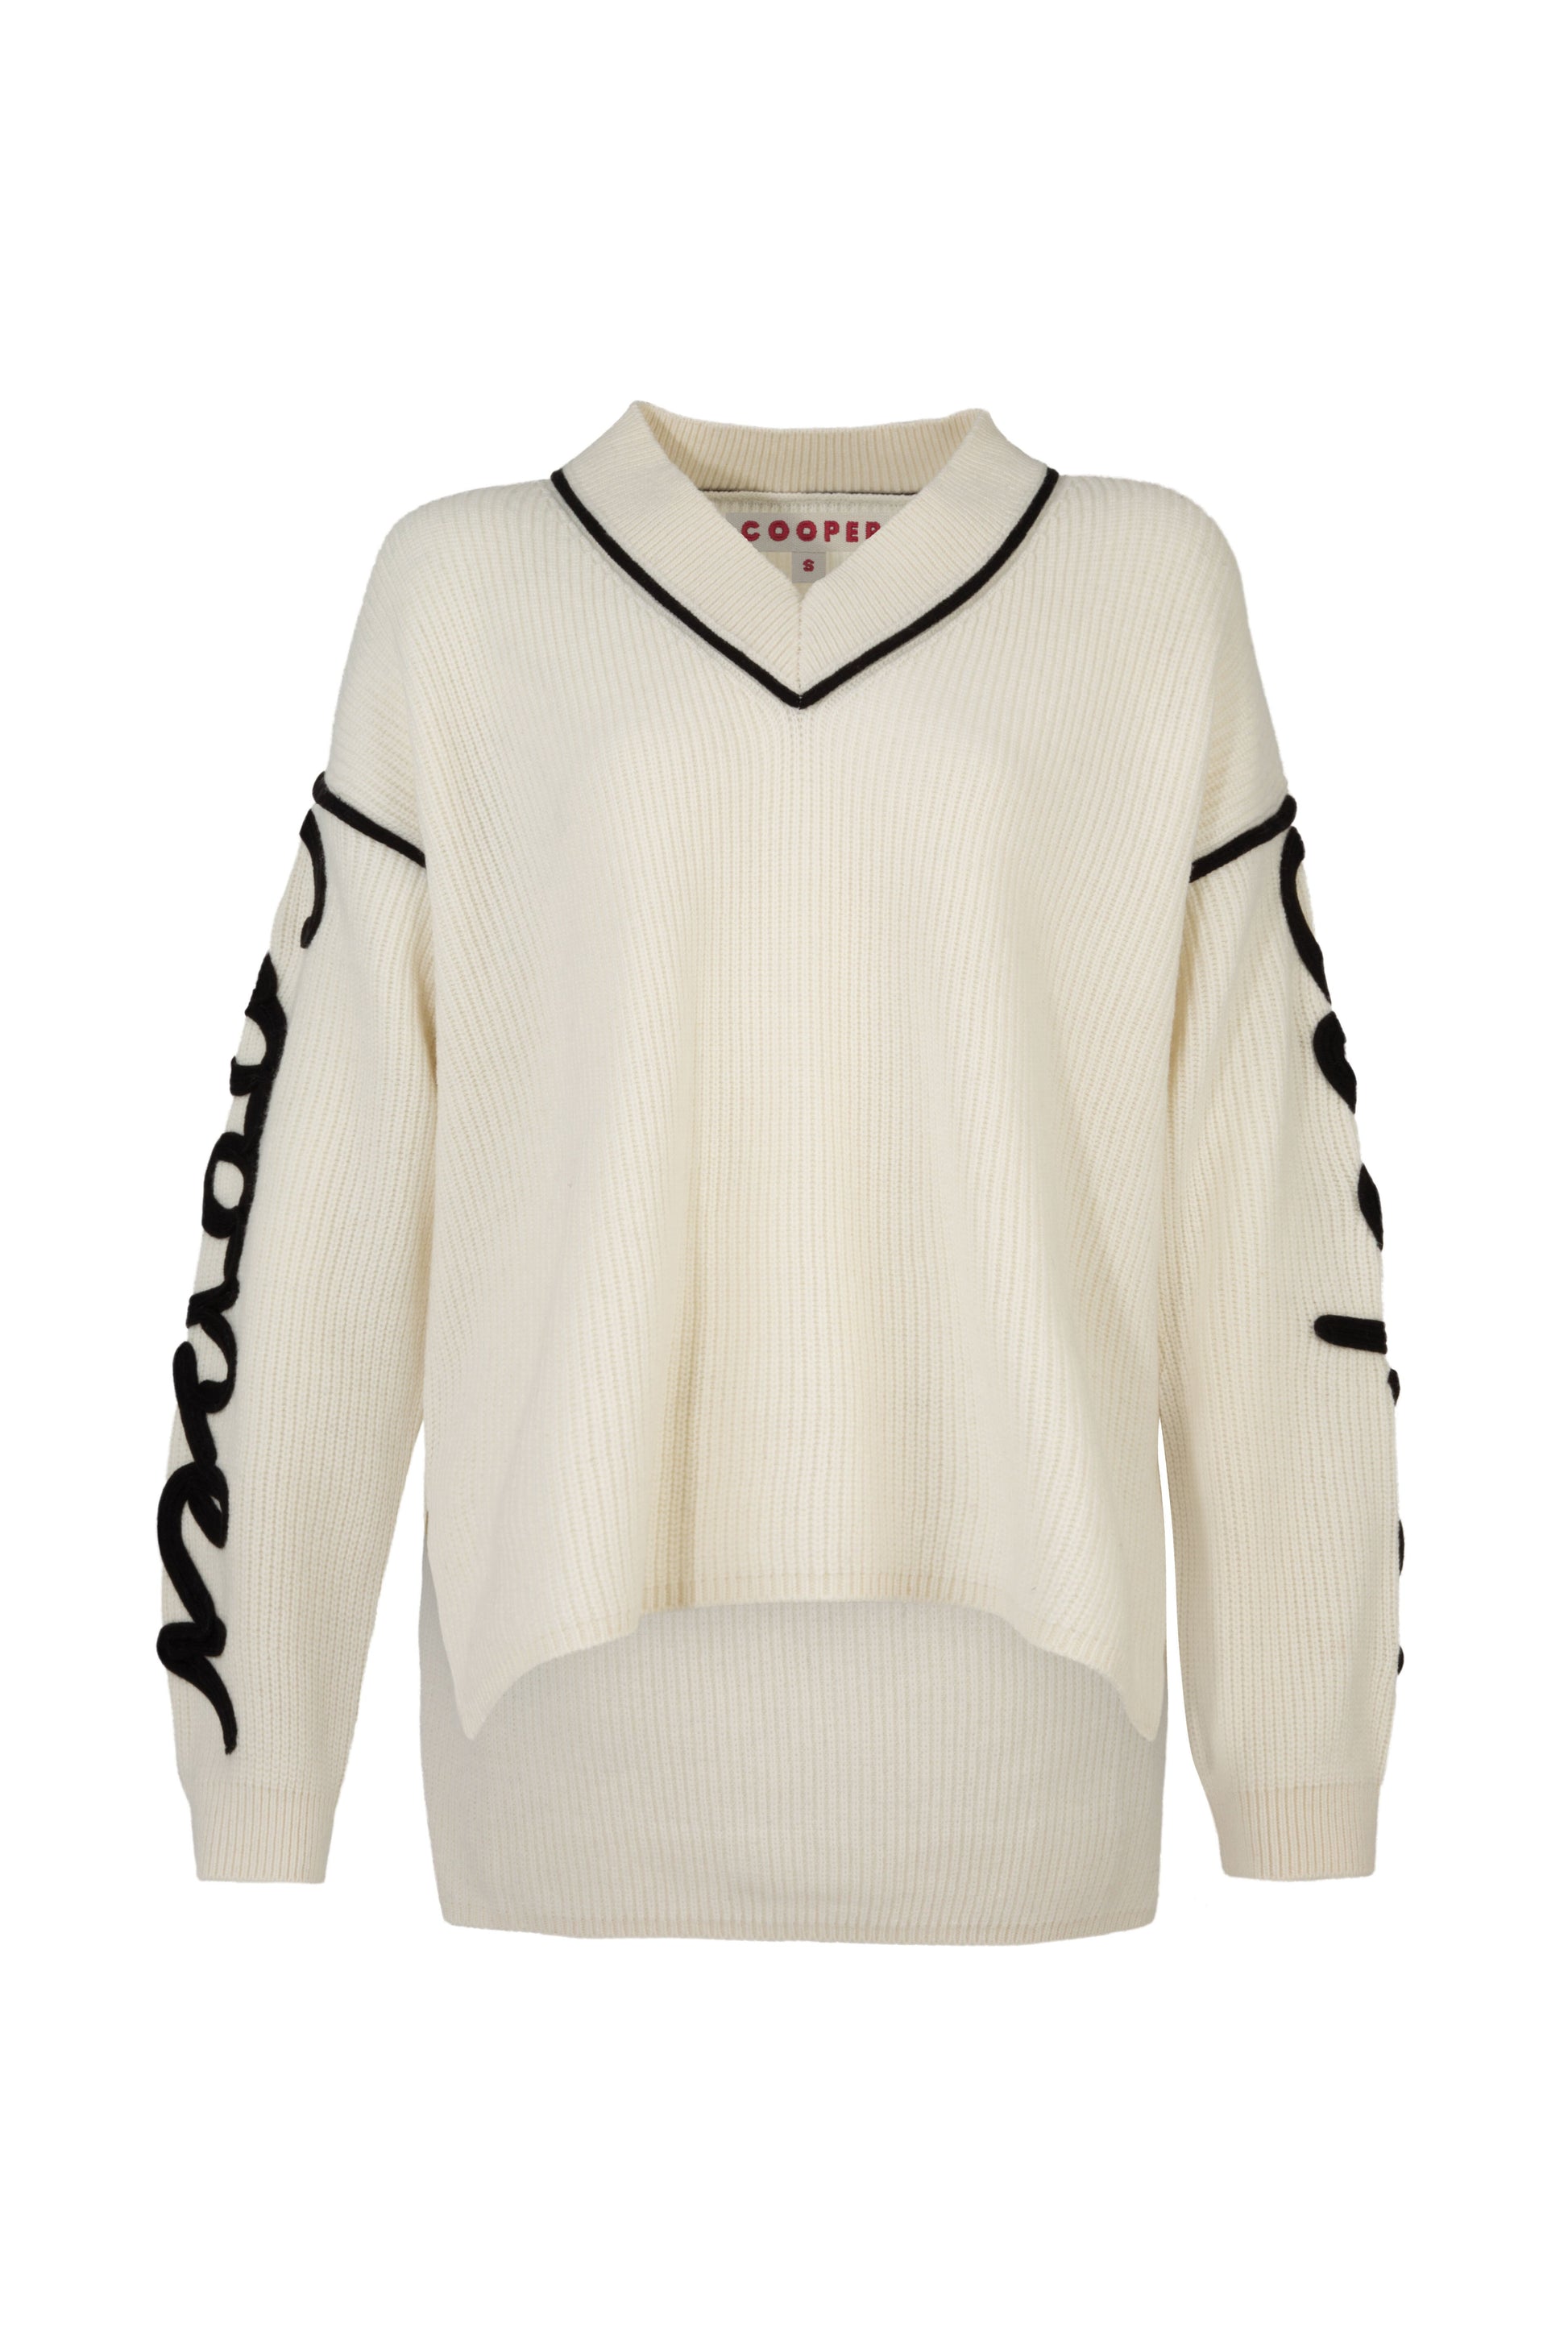 COOPER ROPE ME IN JERSEY - IVORY - THE VOGUE STORE